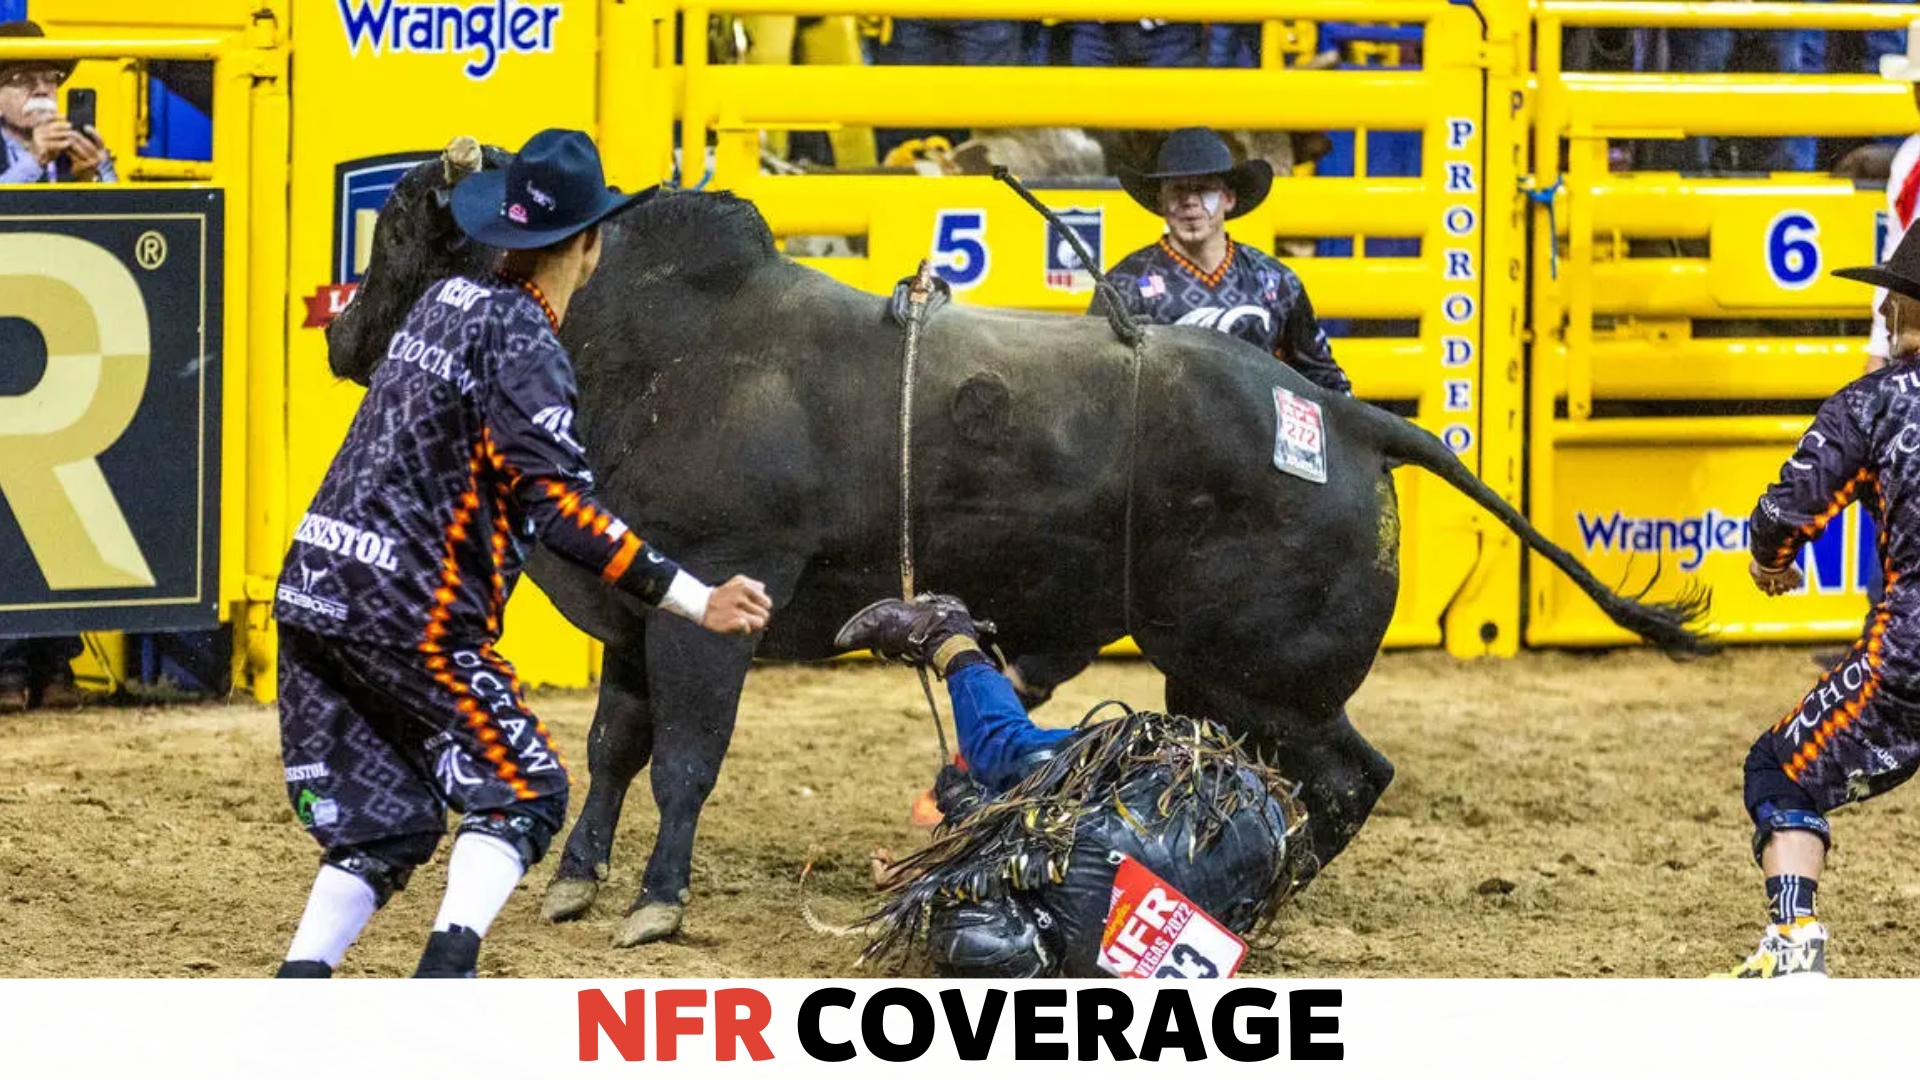 Bull Rider Injured at NFR The Grit, The Pain, The Comeback NFRCoverage